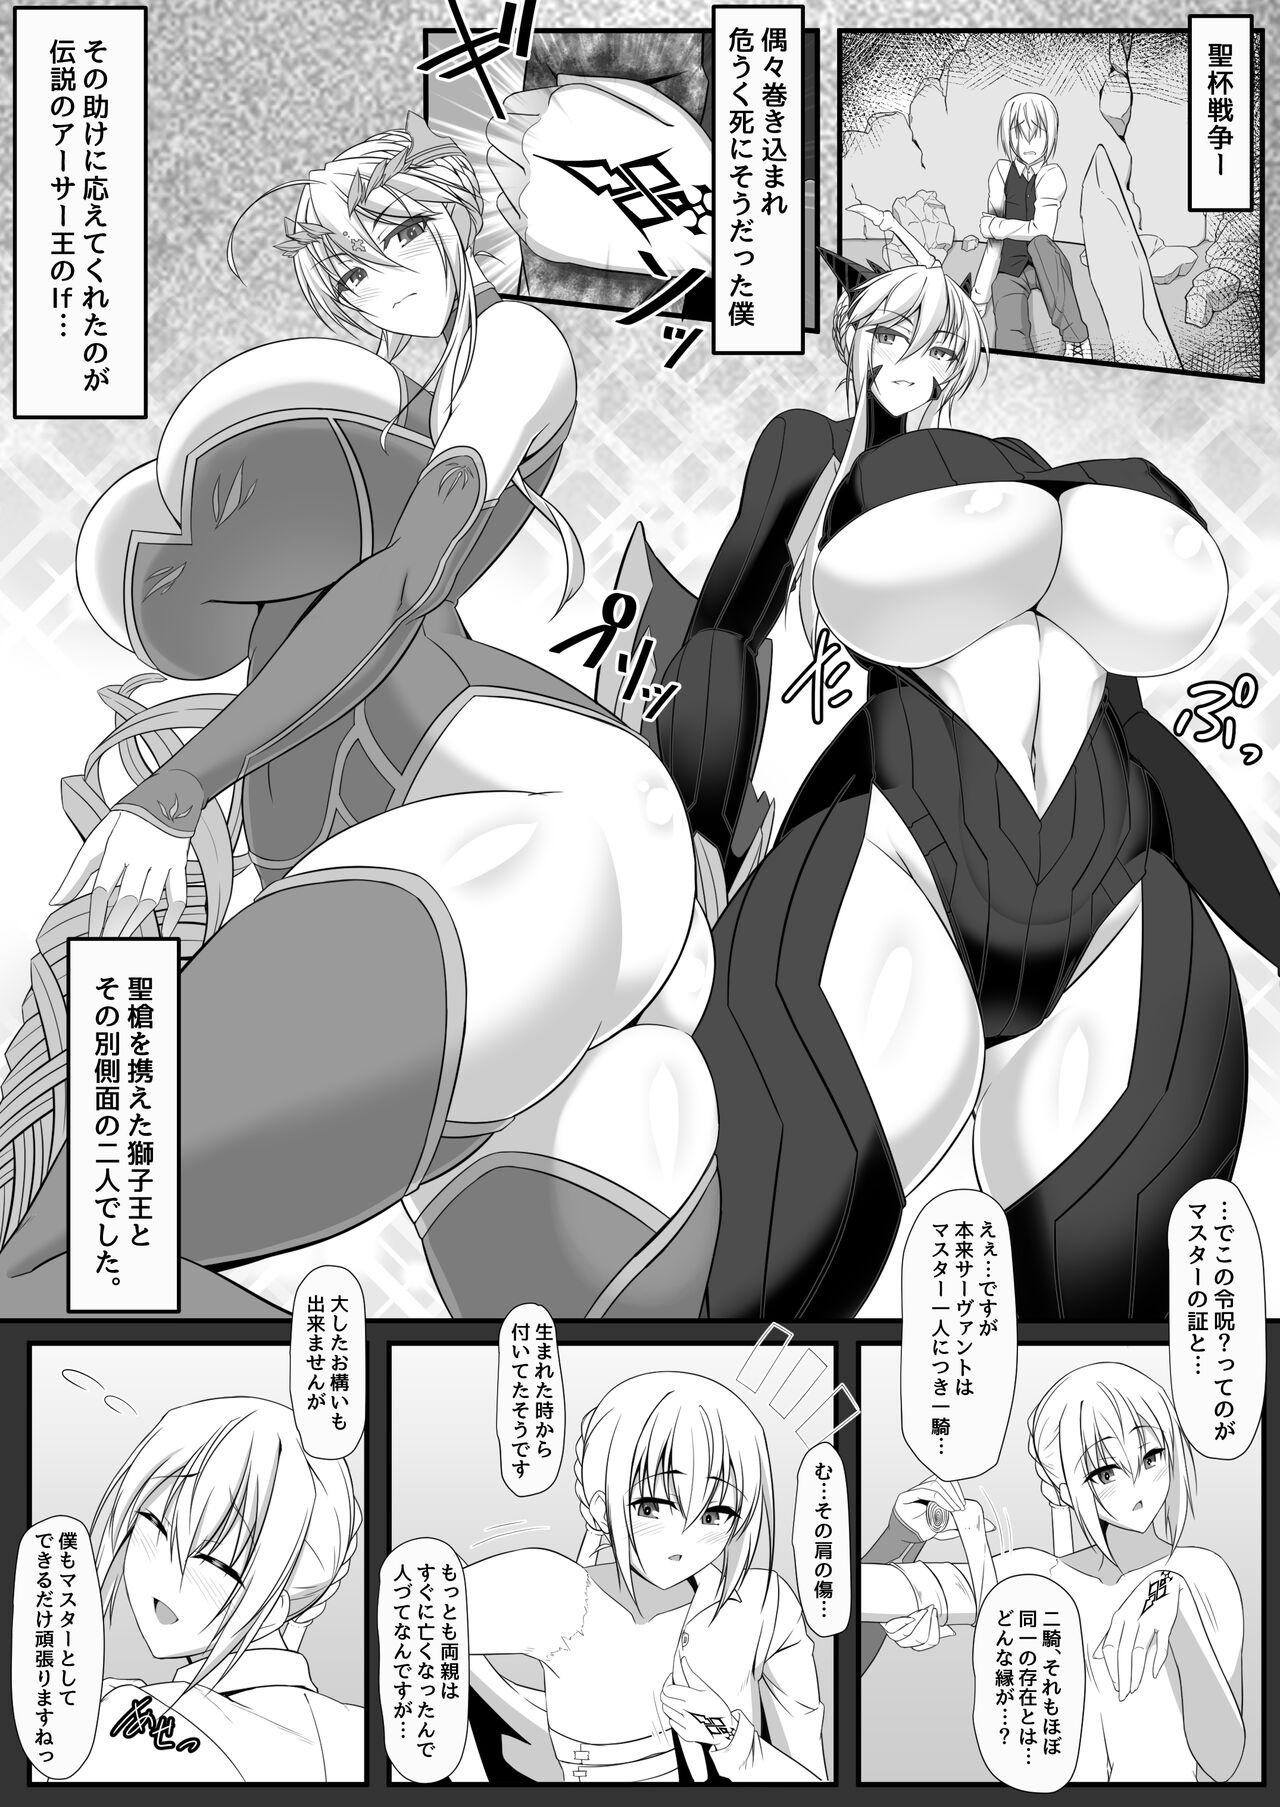 Hardcore Free Porn Souou to Maguau - Fate grand order Cdmx - Page 4